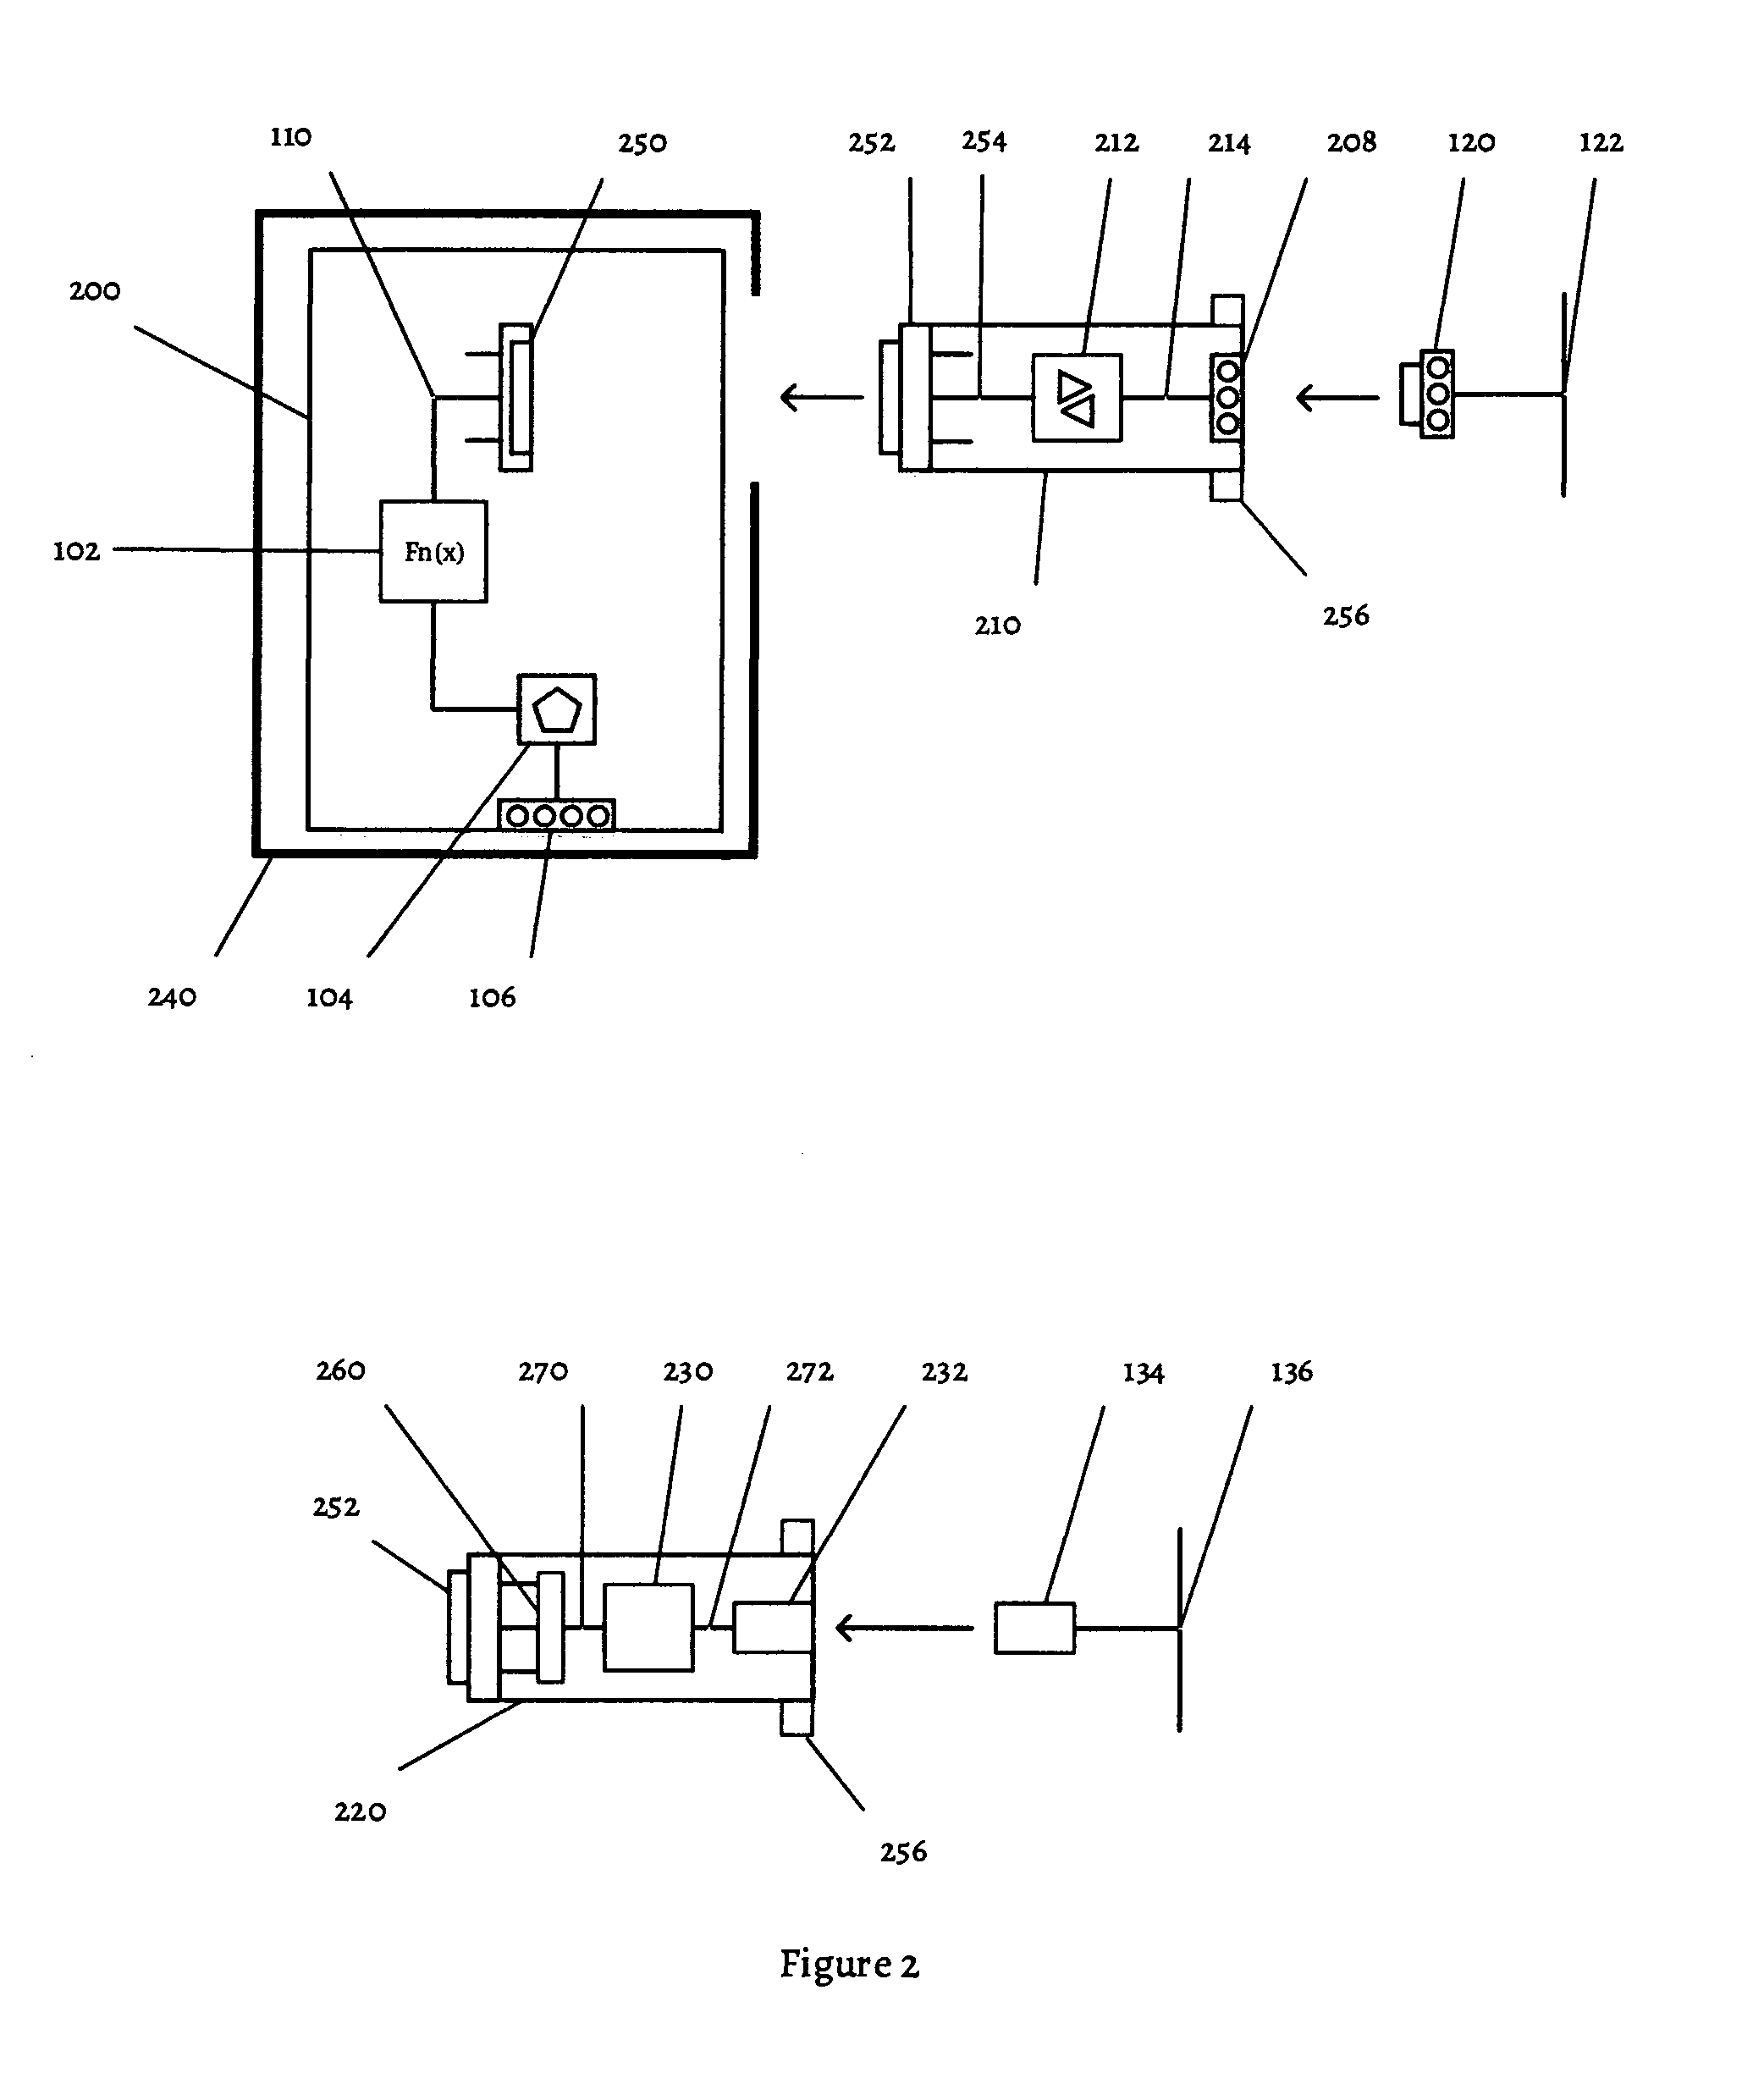 Modular system and method for communicating information between different protocols on a control network